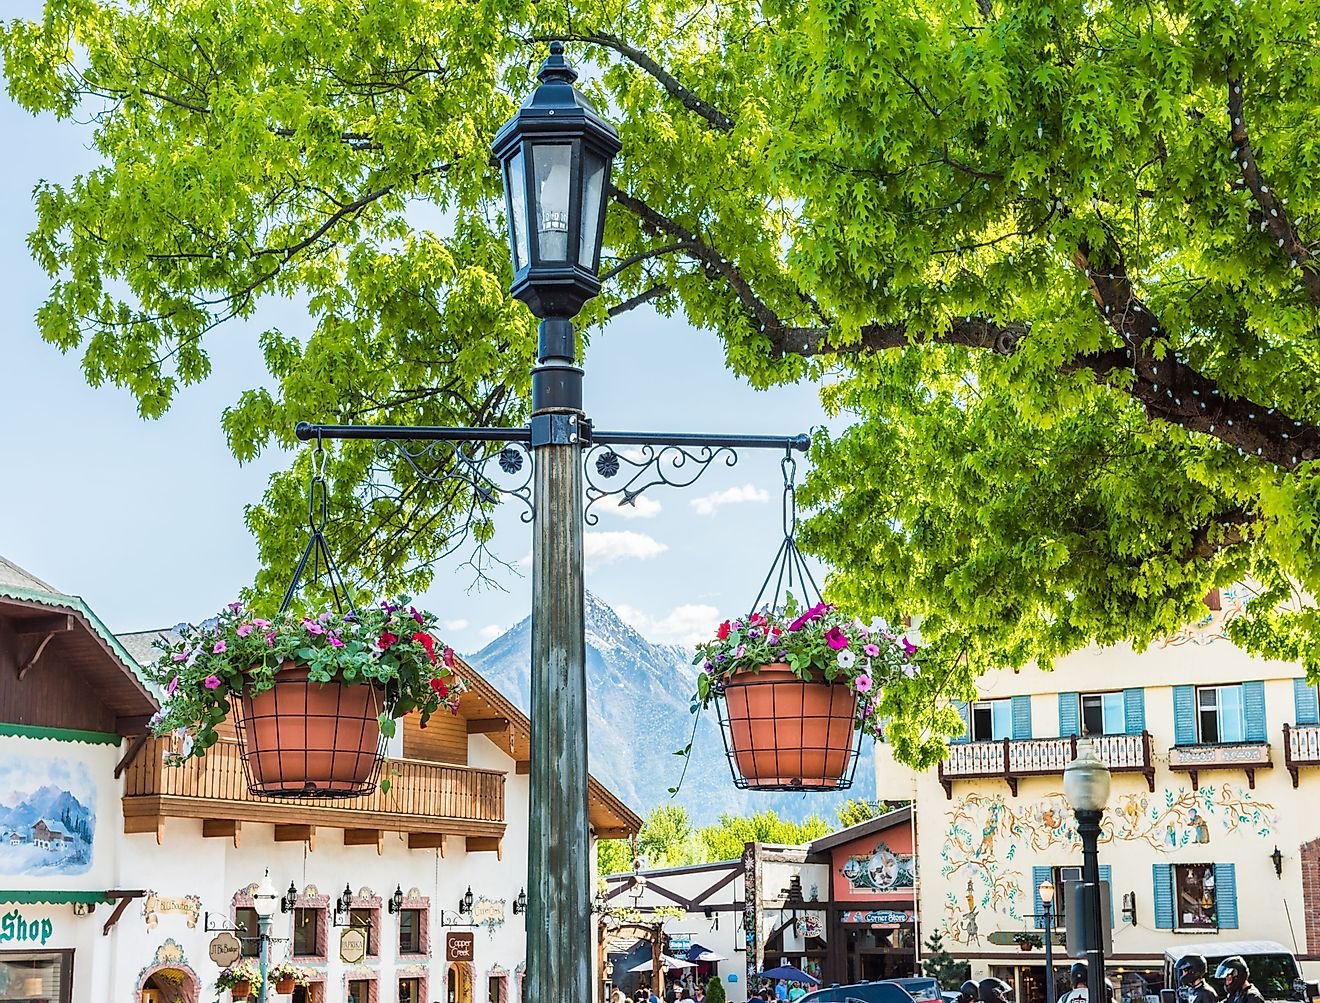 9 American Towns That Look Like You're In Europe